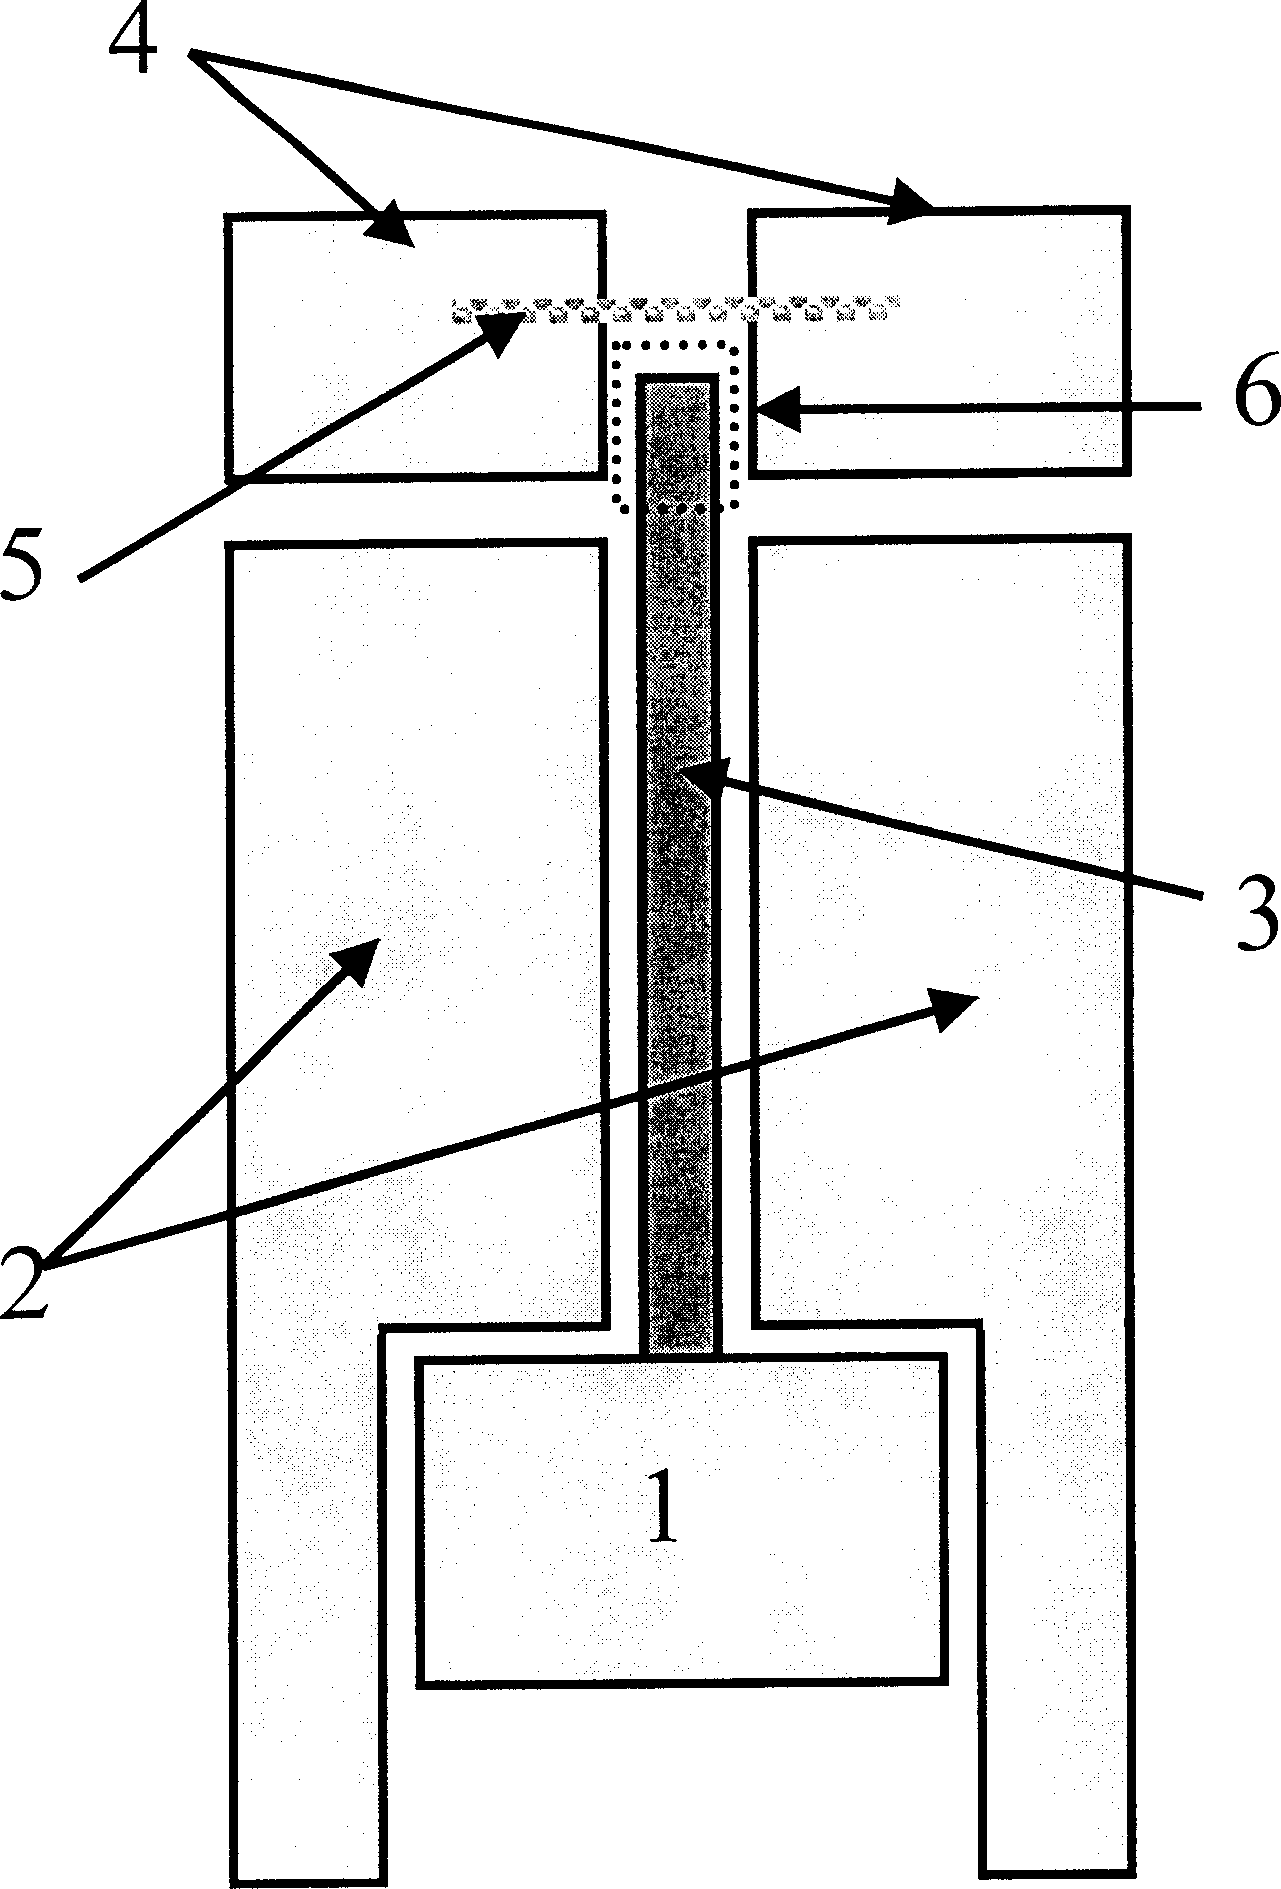 Single electron memory having carbon nano tube structure and process for making it